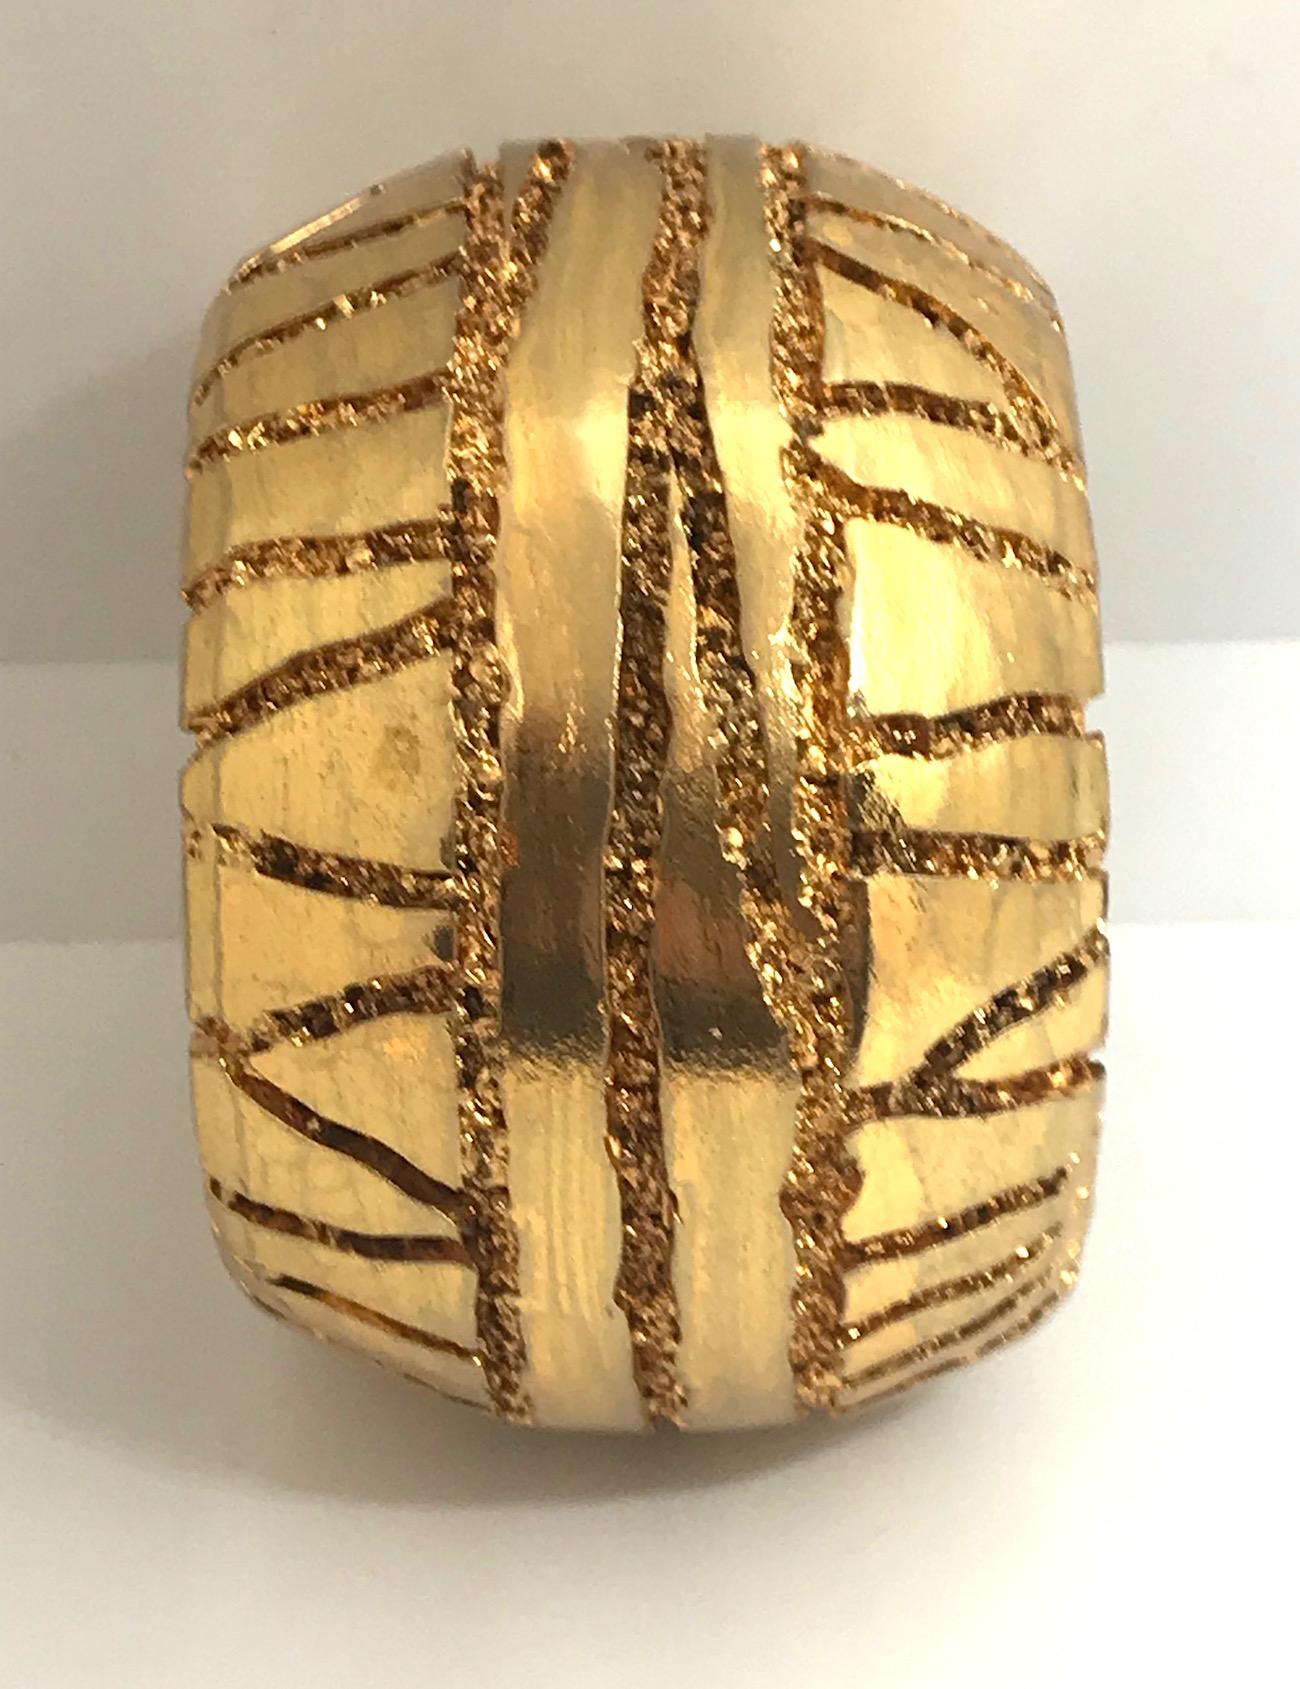 A true statement bracelet is this rare wide 1980s Christian Lacroix cuff. The molded and carved resin base has a heavy layer of 18K gold plated metal. It is cold to the touch and not a thin gold leaf. 2.5 inches wide. The interior diameter is 2.5